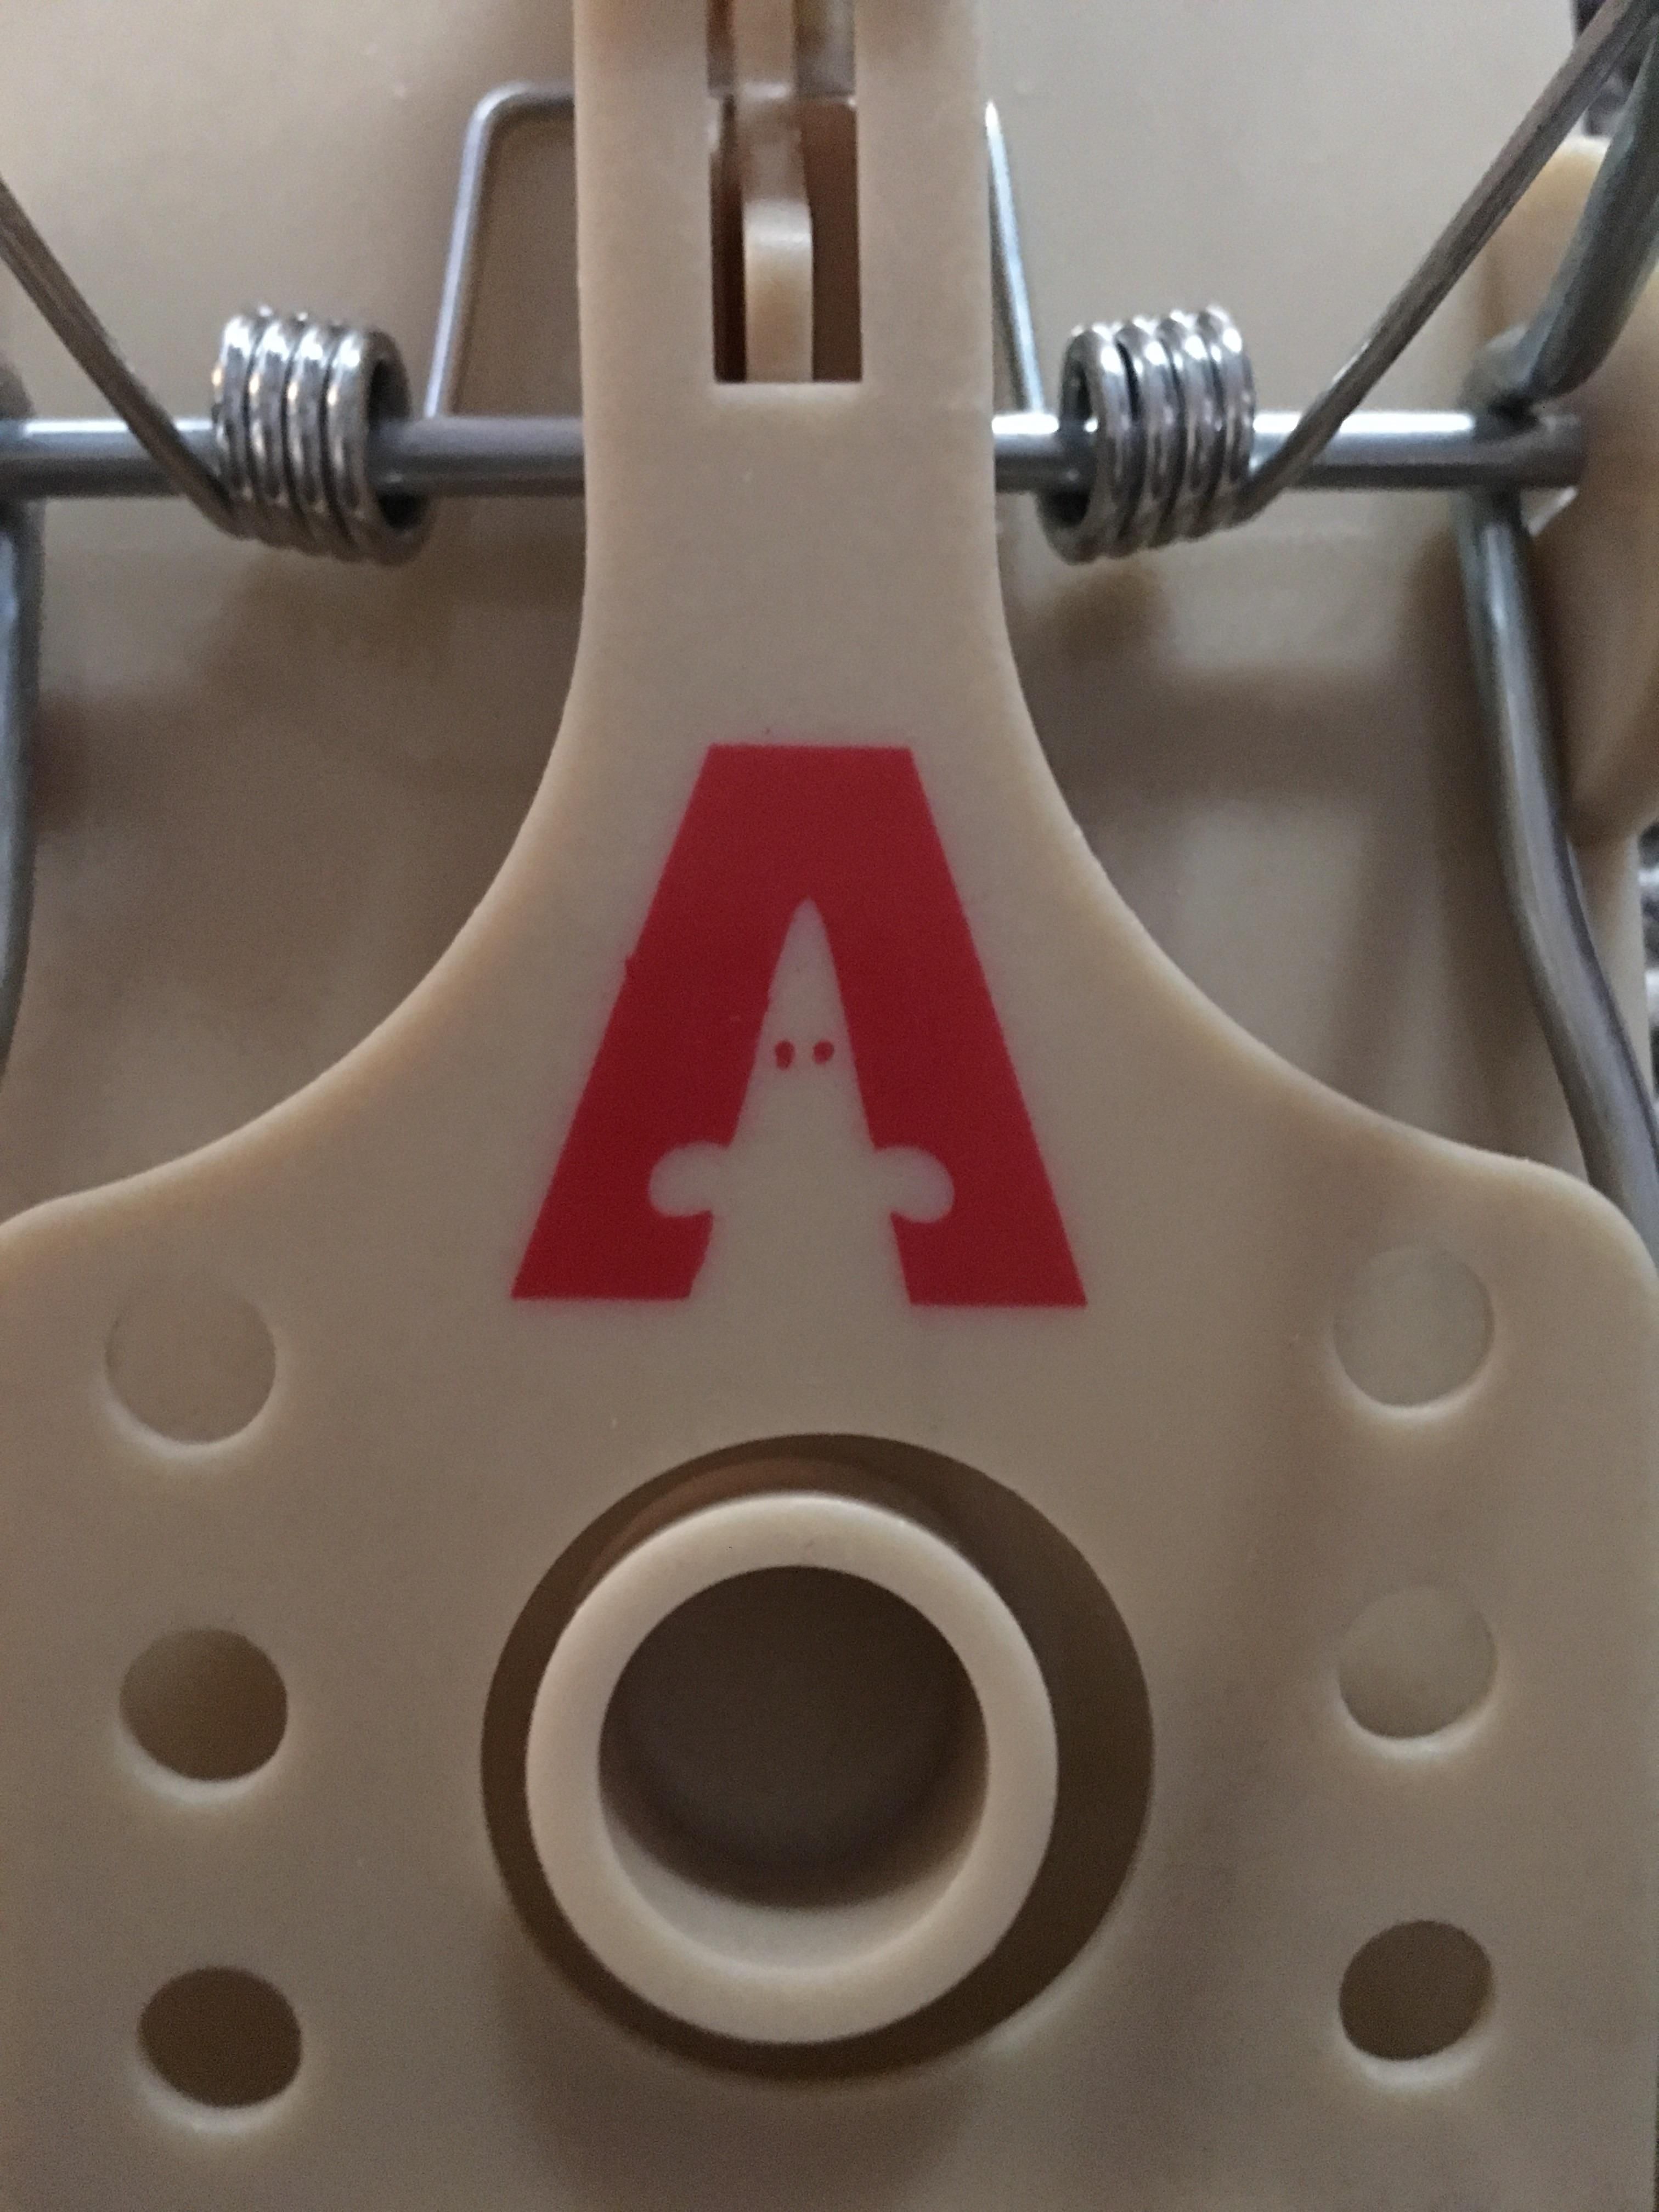 Sometimes when I look at my mousetrap I see a mouse, other times I see a Little klansman with stubby arms.